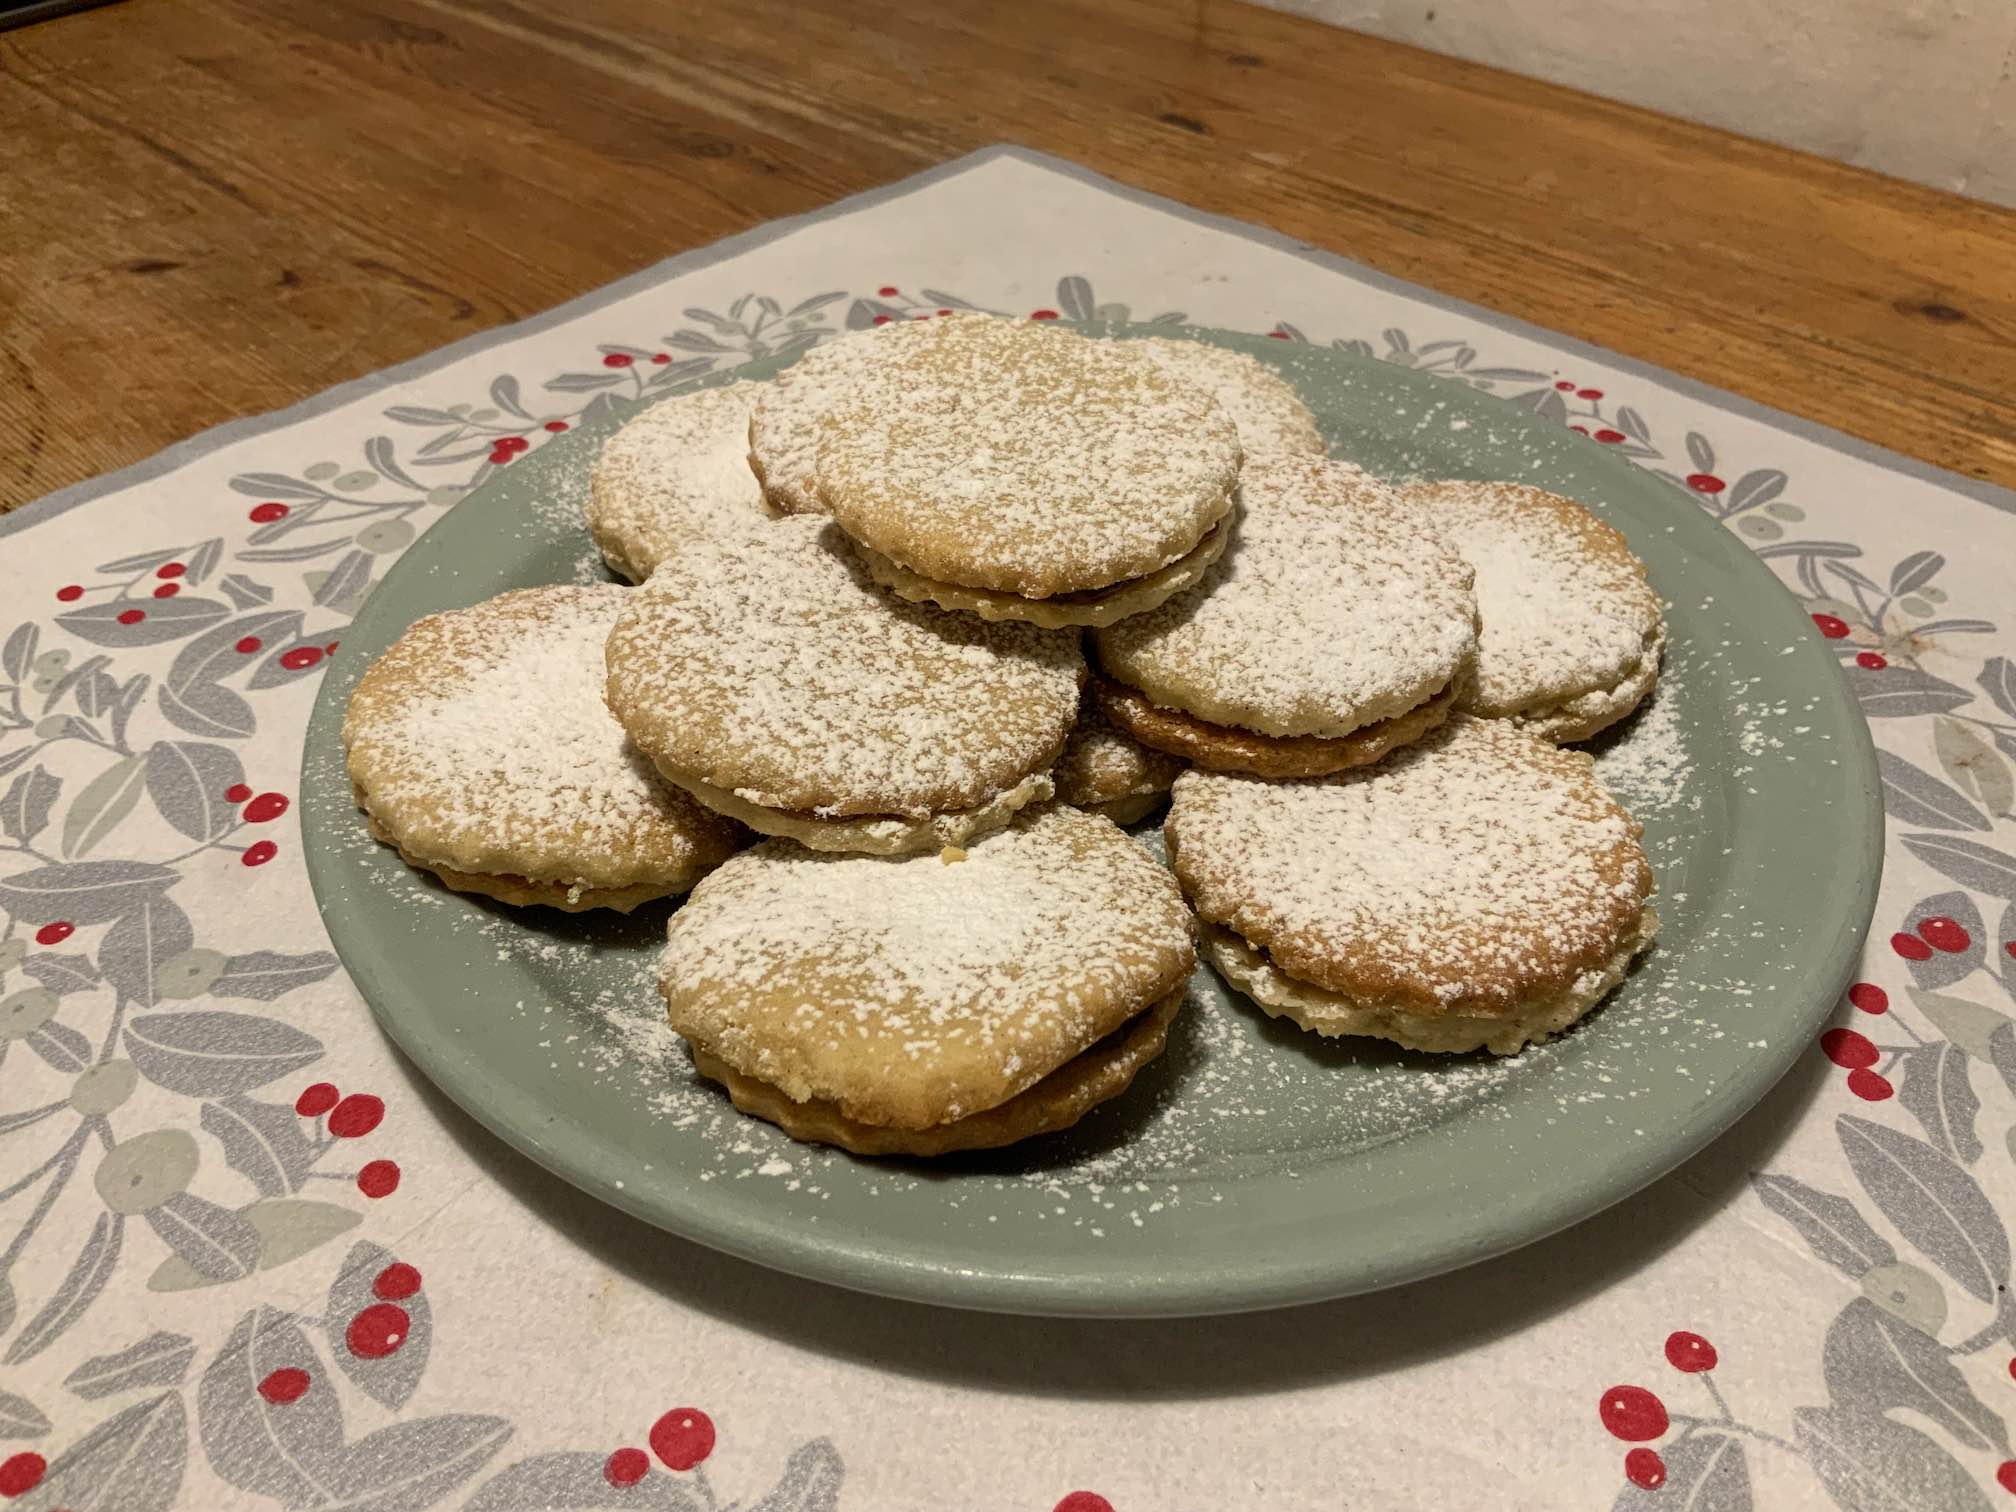 Photo of a plate filled with sugar dusted double-layer cookies.